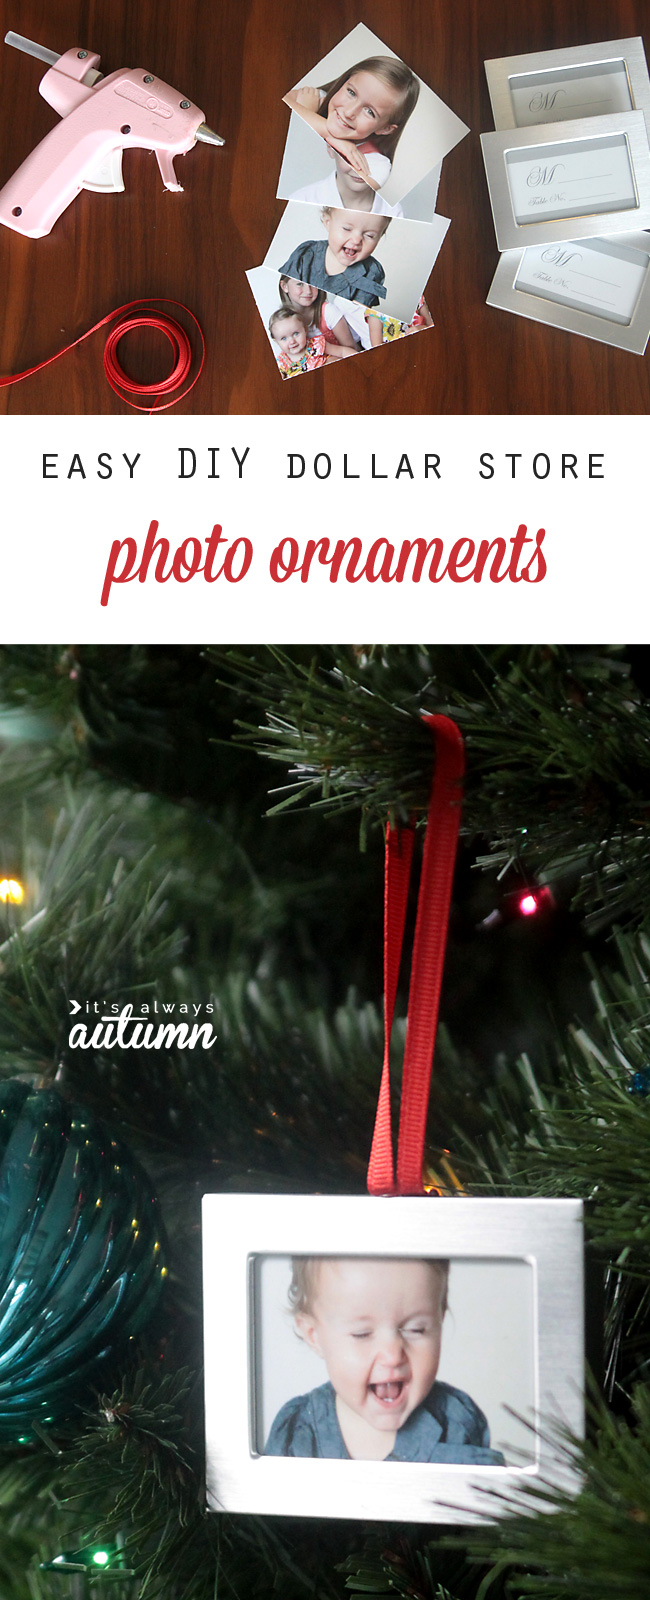 DIY photo ornaments hanging on a Christmas tree